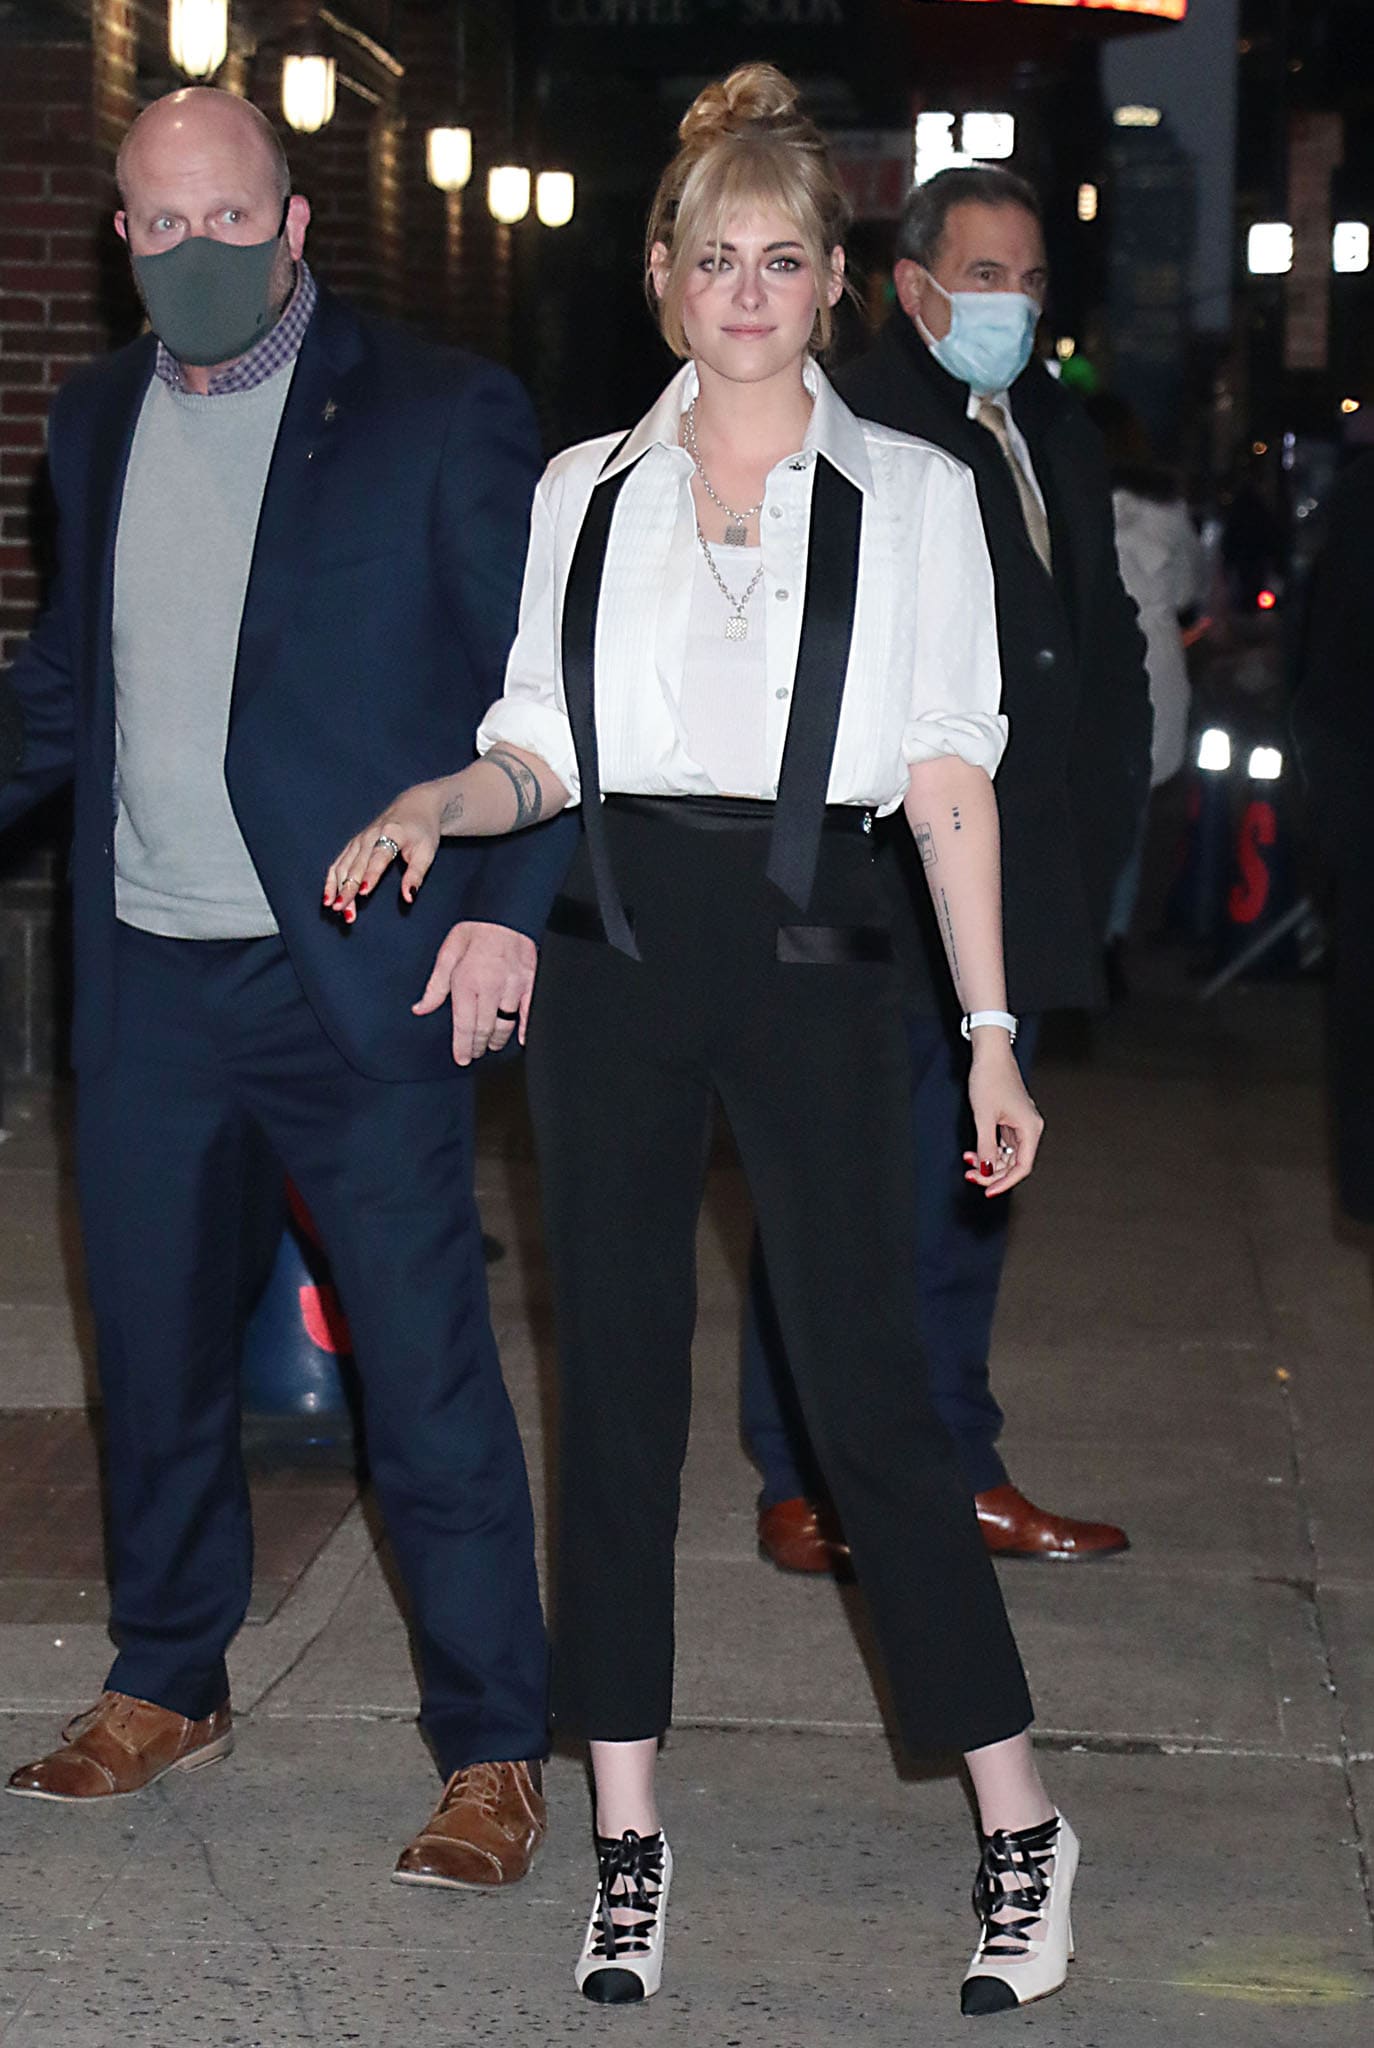 Kristen Stewart shows her rock-chic side in a black-and-white Chanel shirt and pants